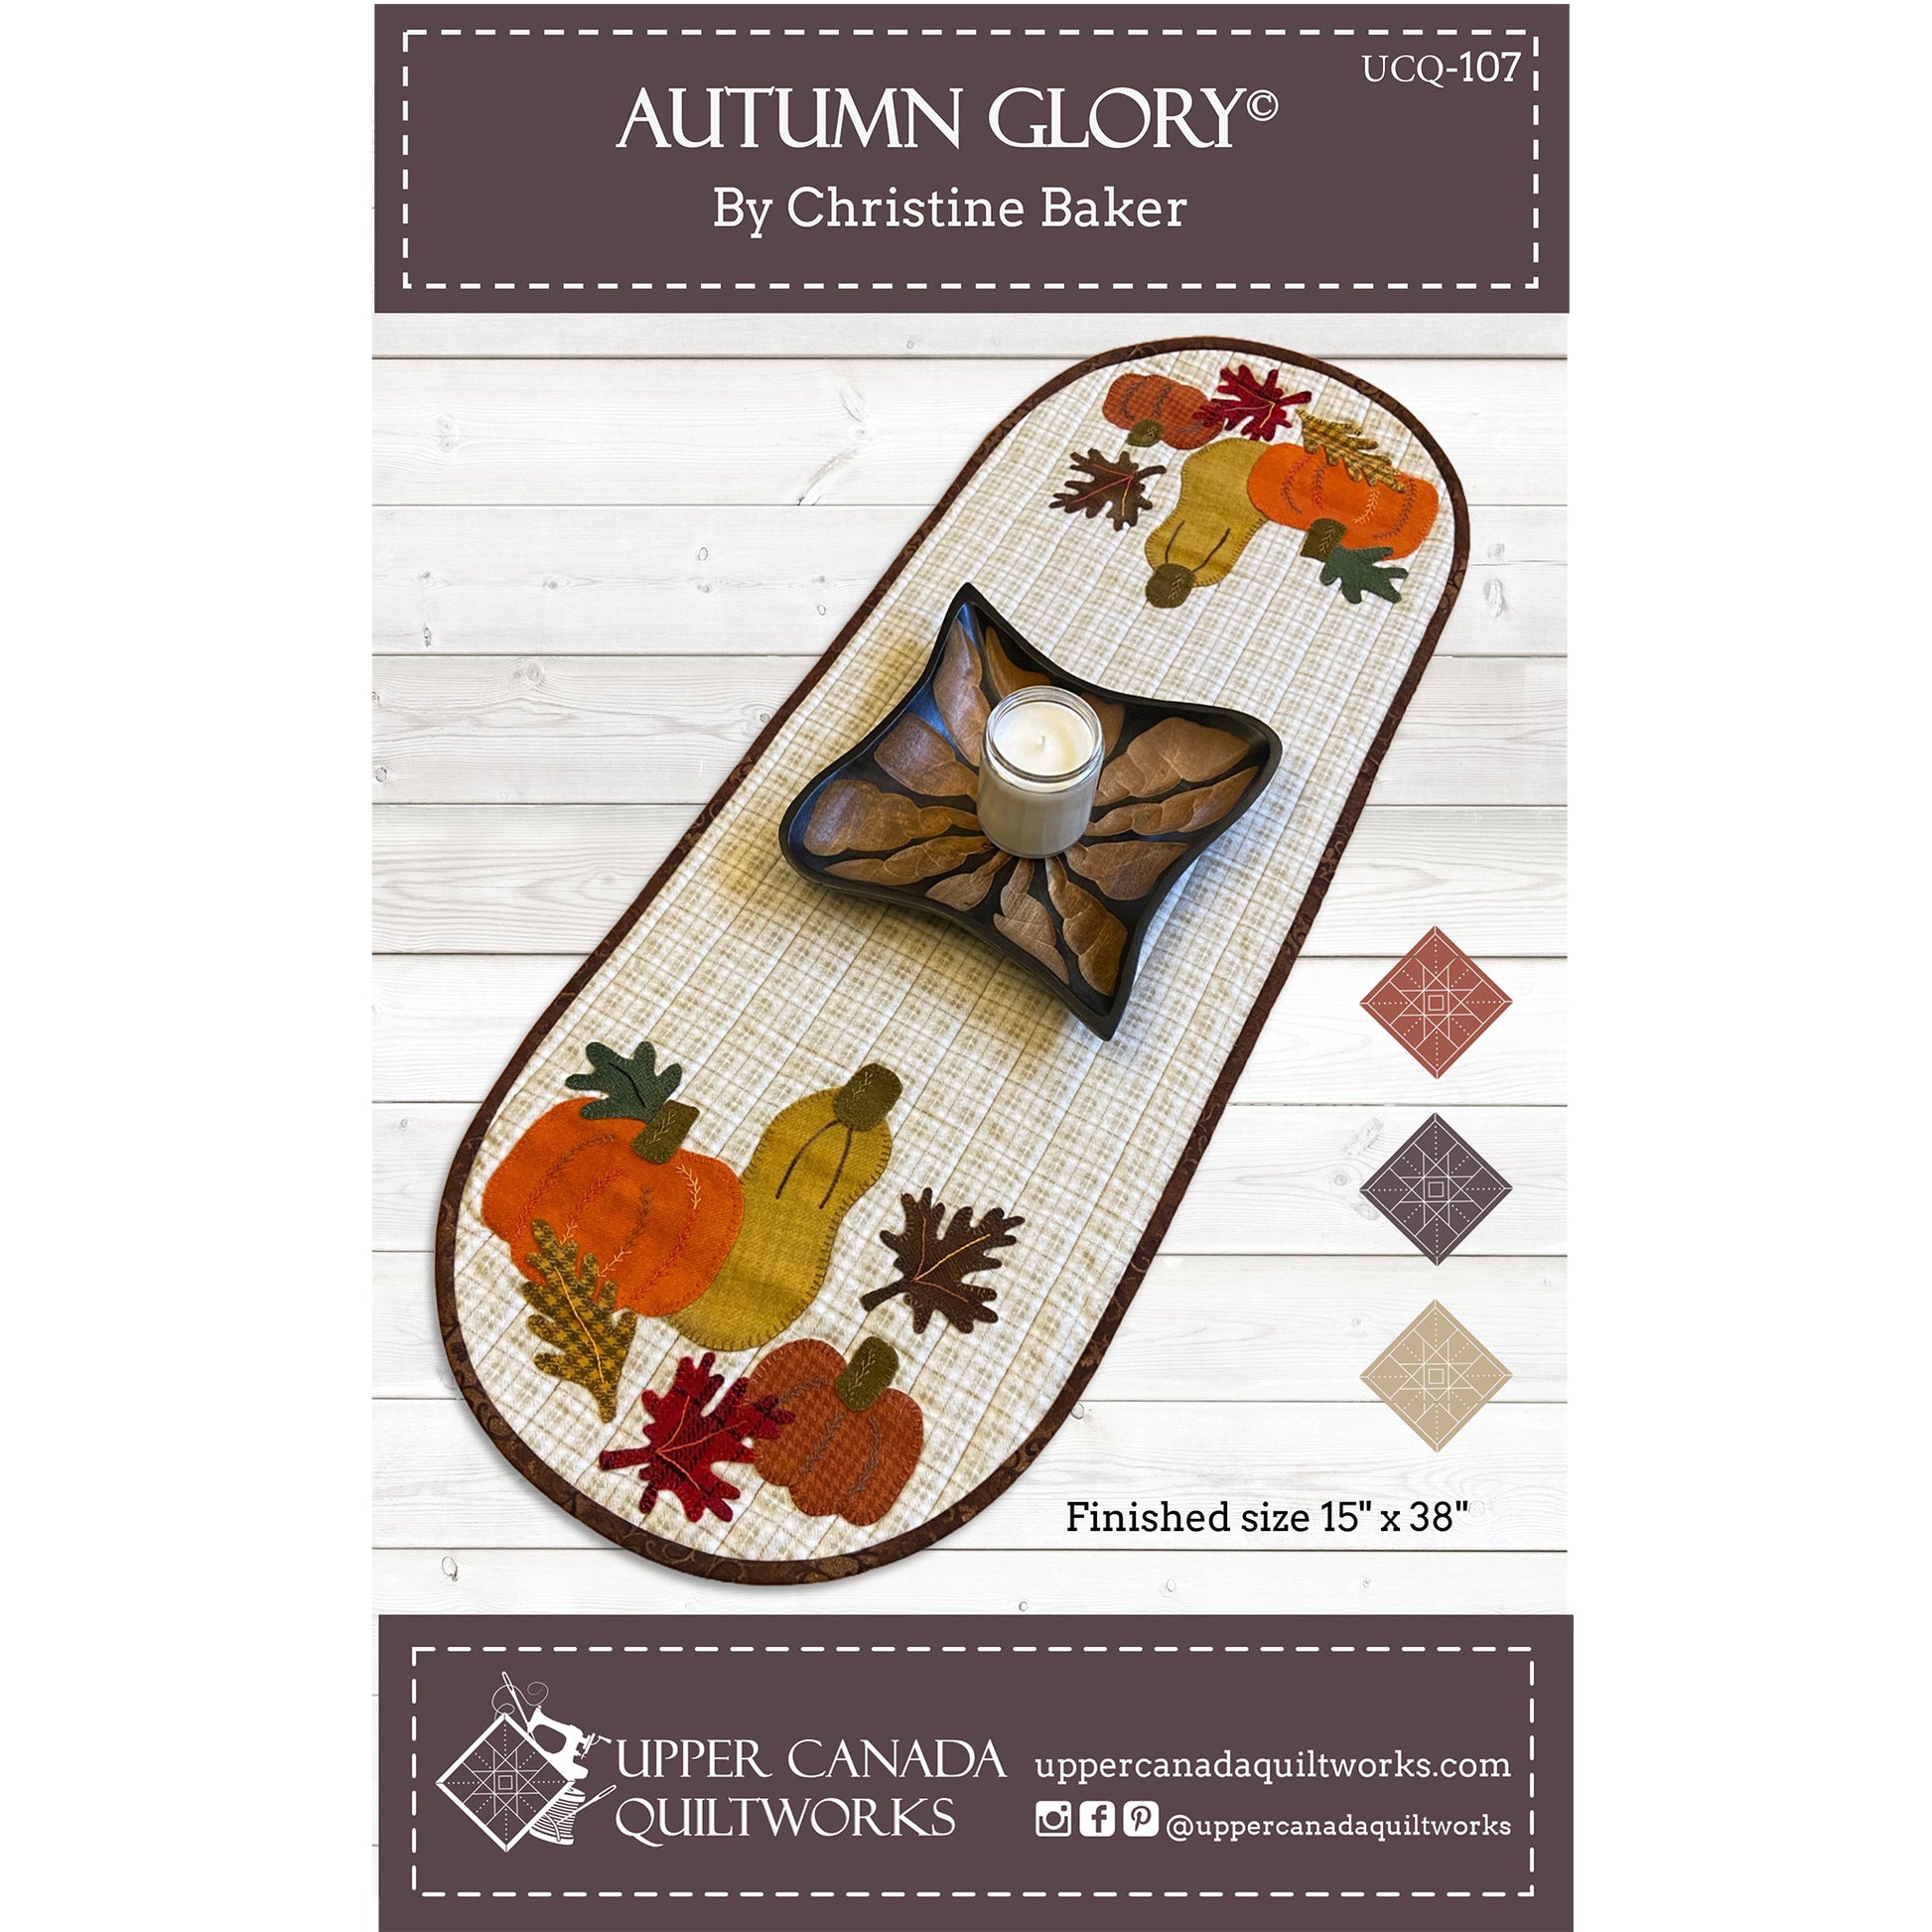 Cover image of pattern for Autumn Glory Table Runner.